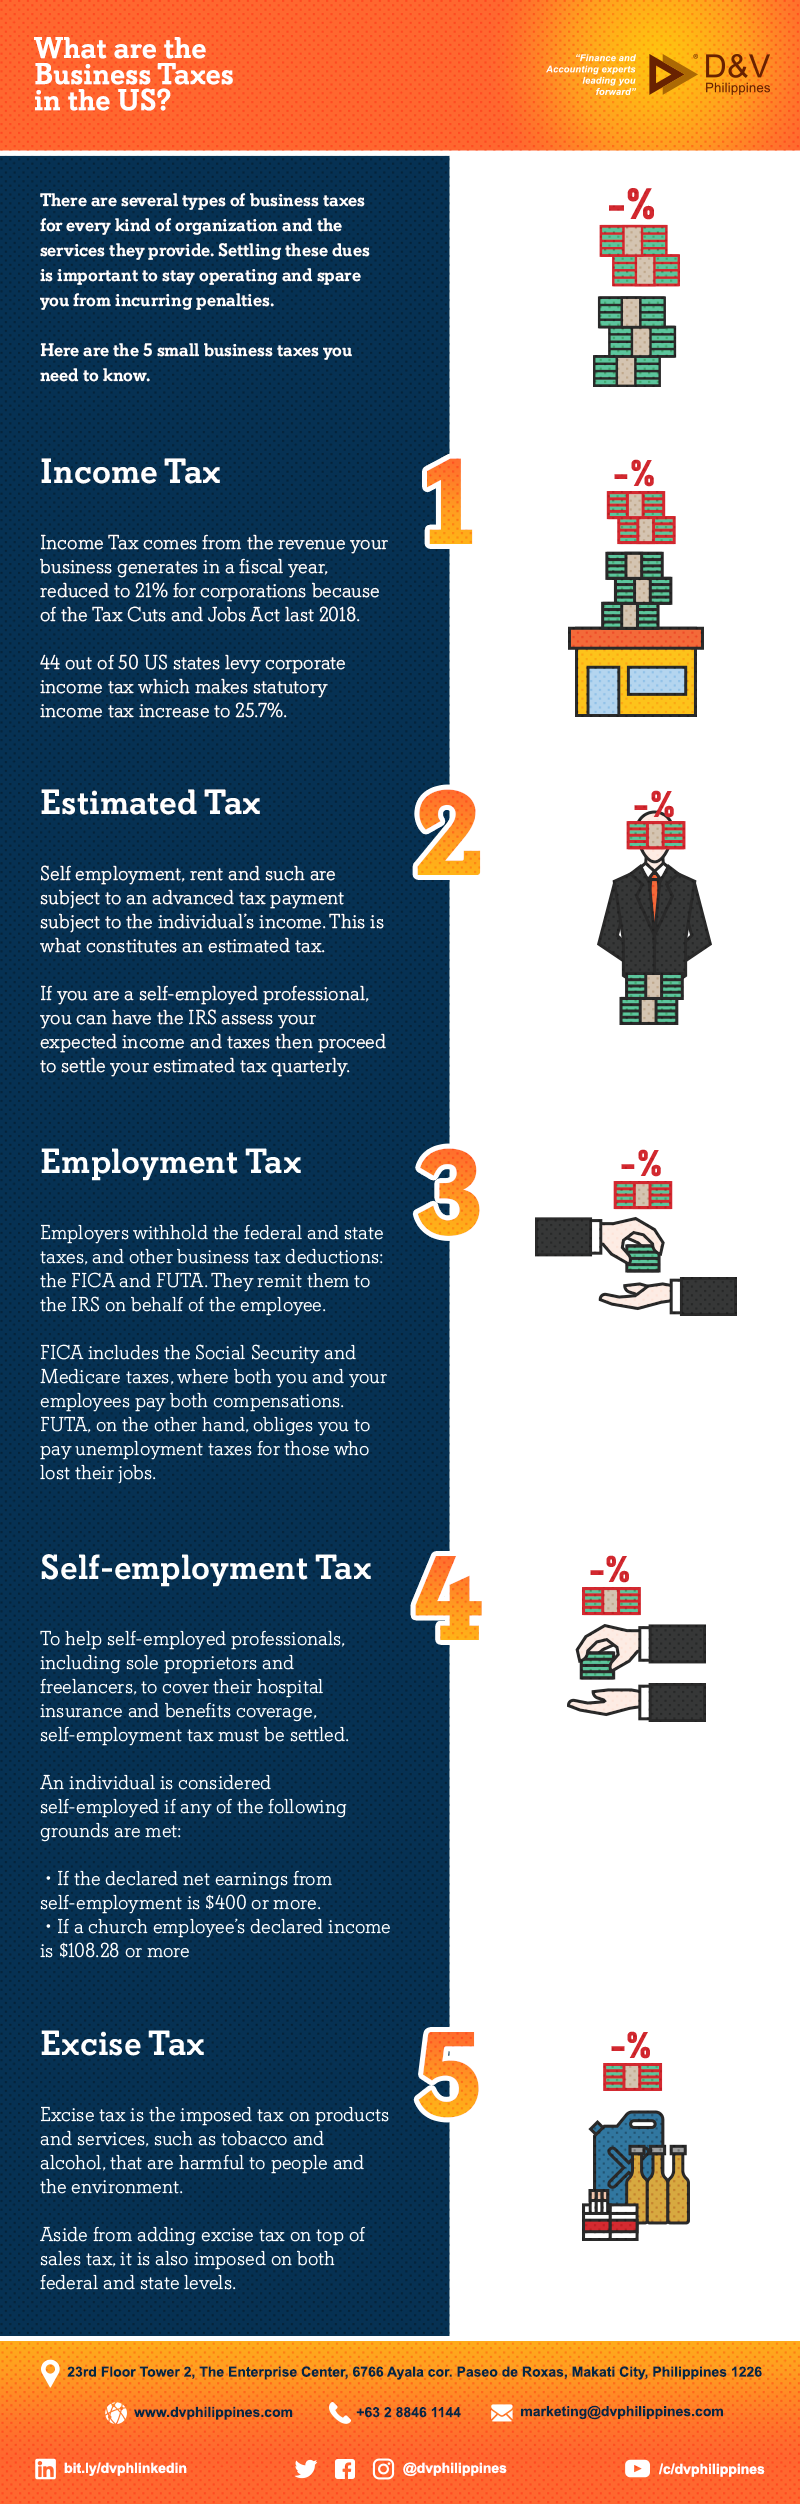 Infograpihcs_What-are-the-Business-Taxes-in-the-US_Main